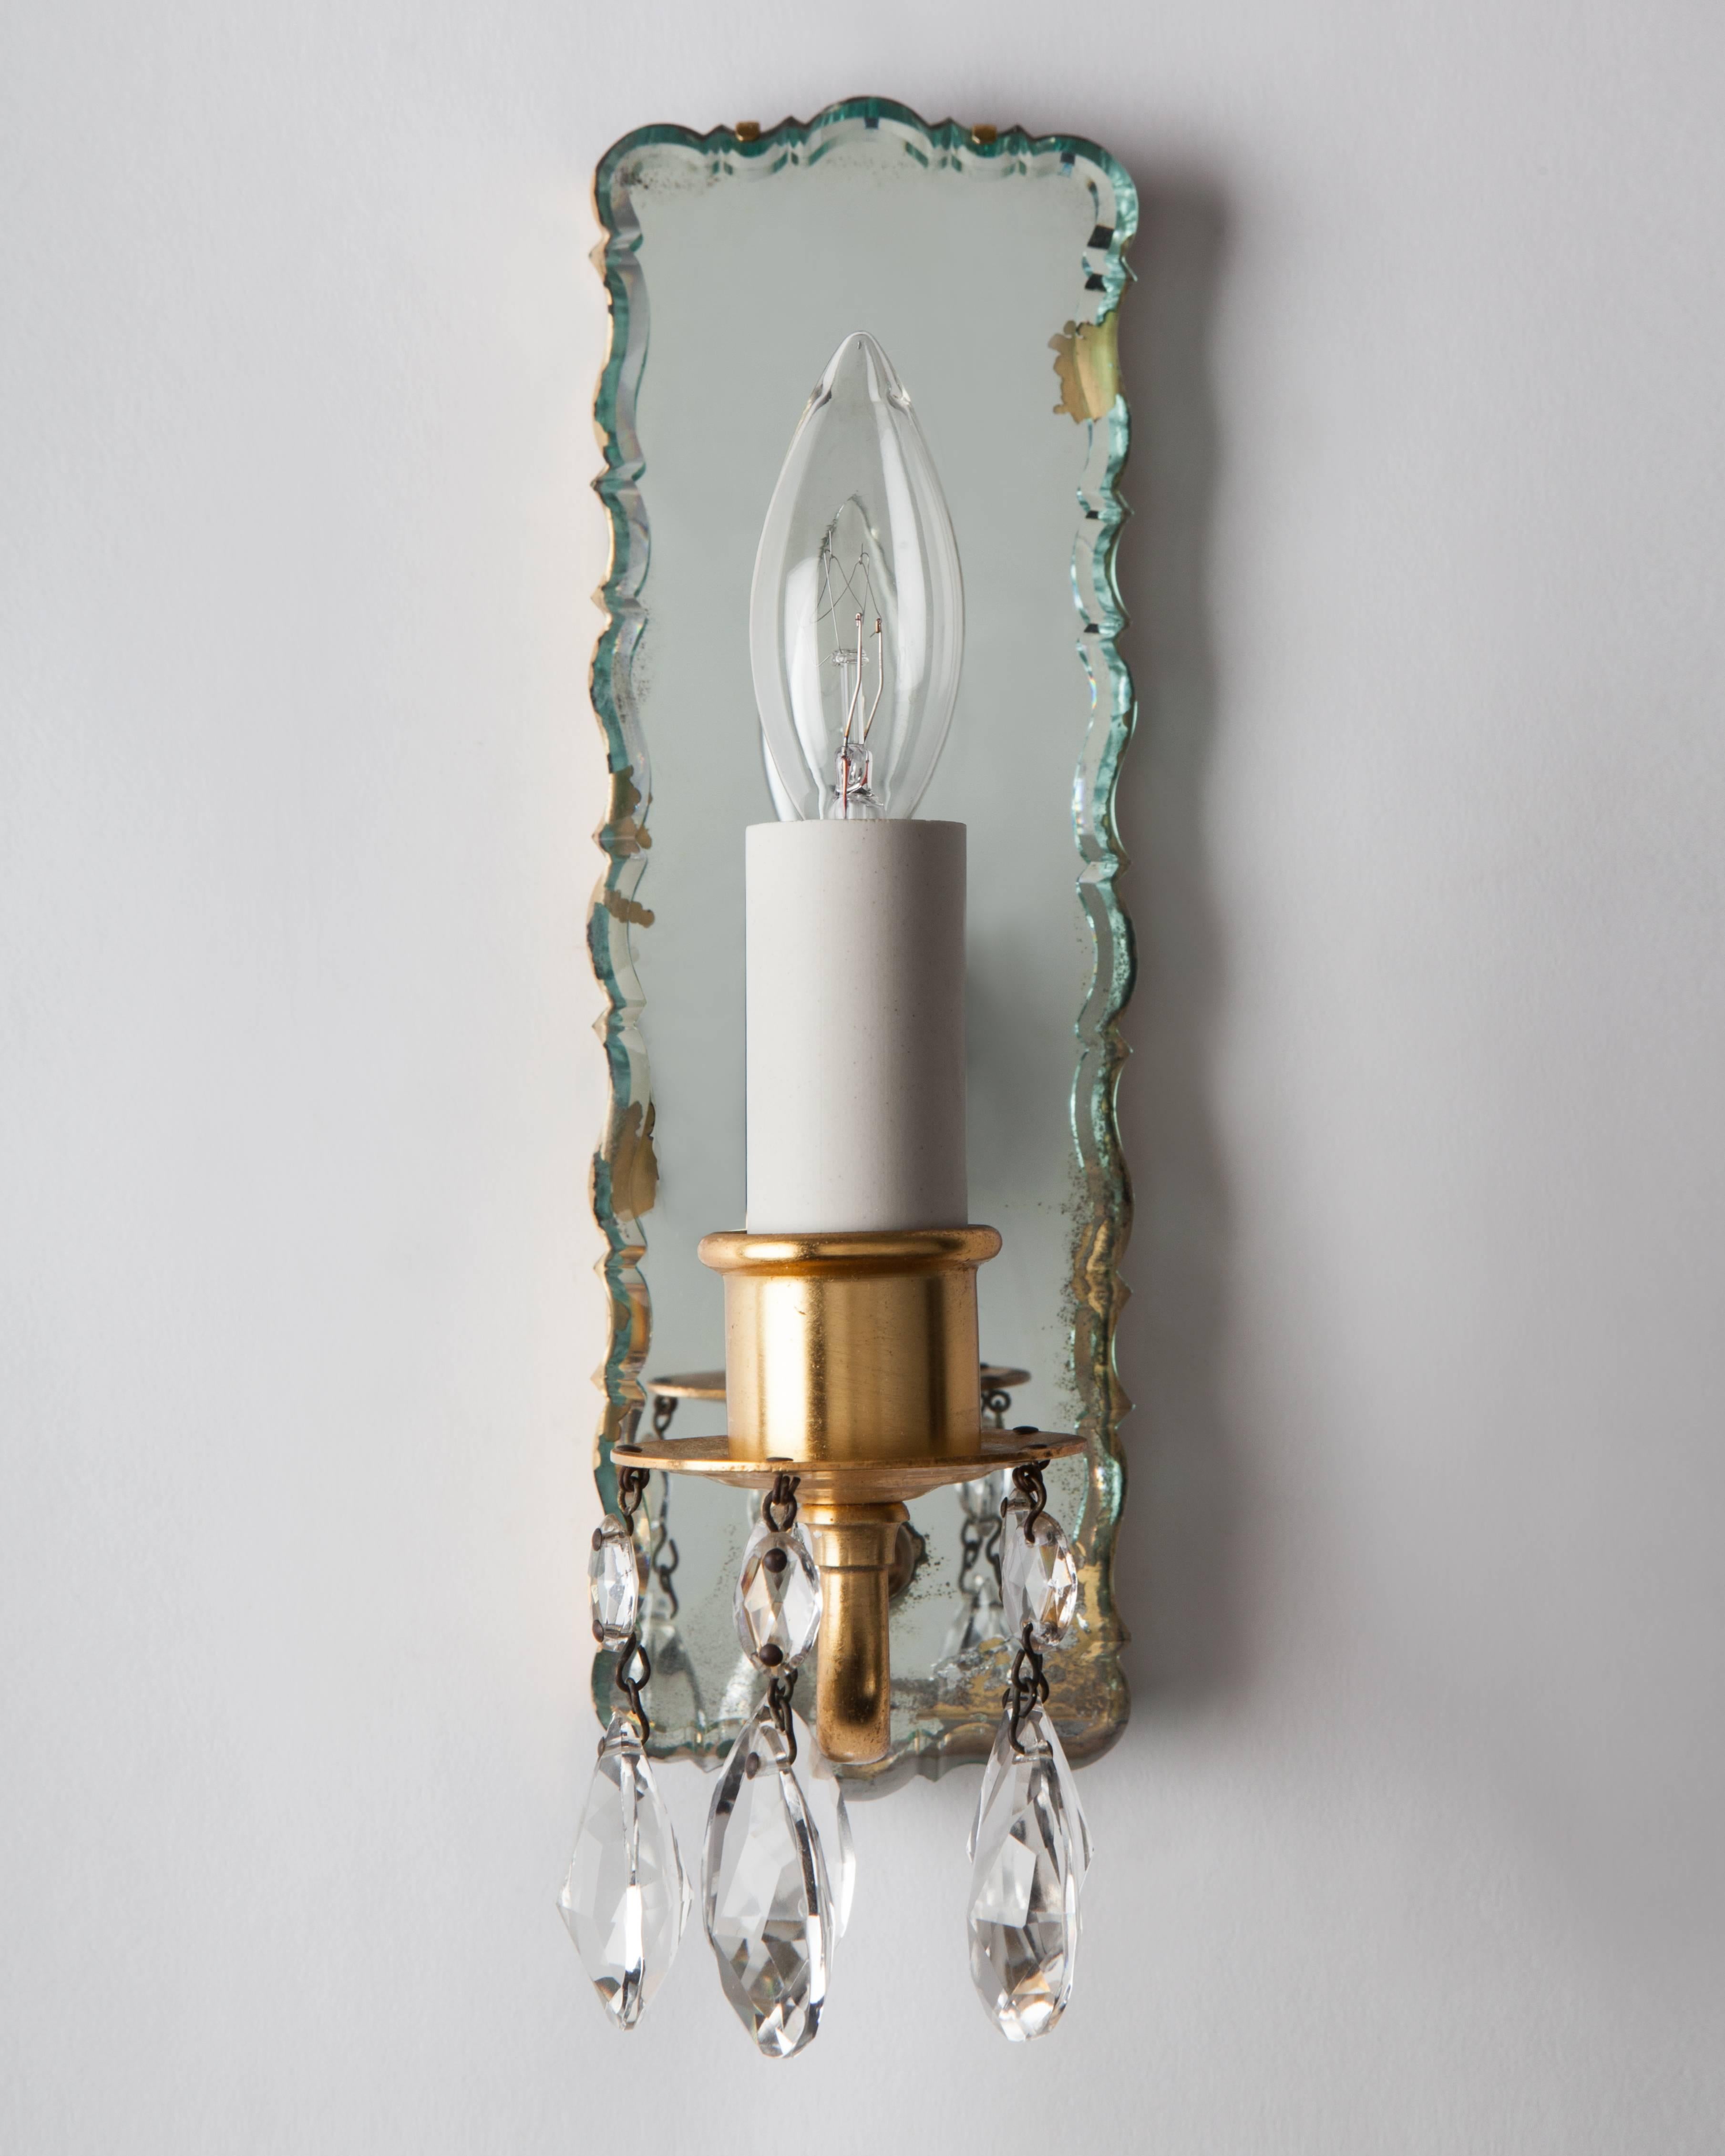 AIS2981
A pair of slender sconces having scalloped, beveled mirrors as backplates and gilded metalwork dressed with prisms. Due to the antique nature of this item there are nicks and imperfections in the glass as well as losses to the